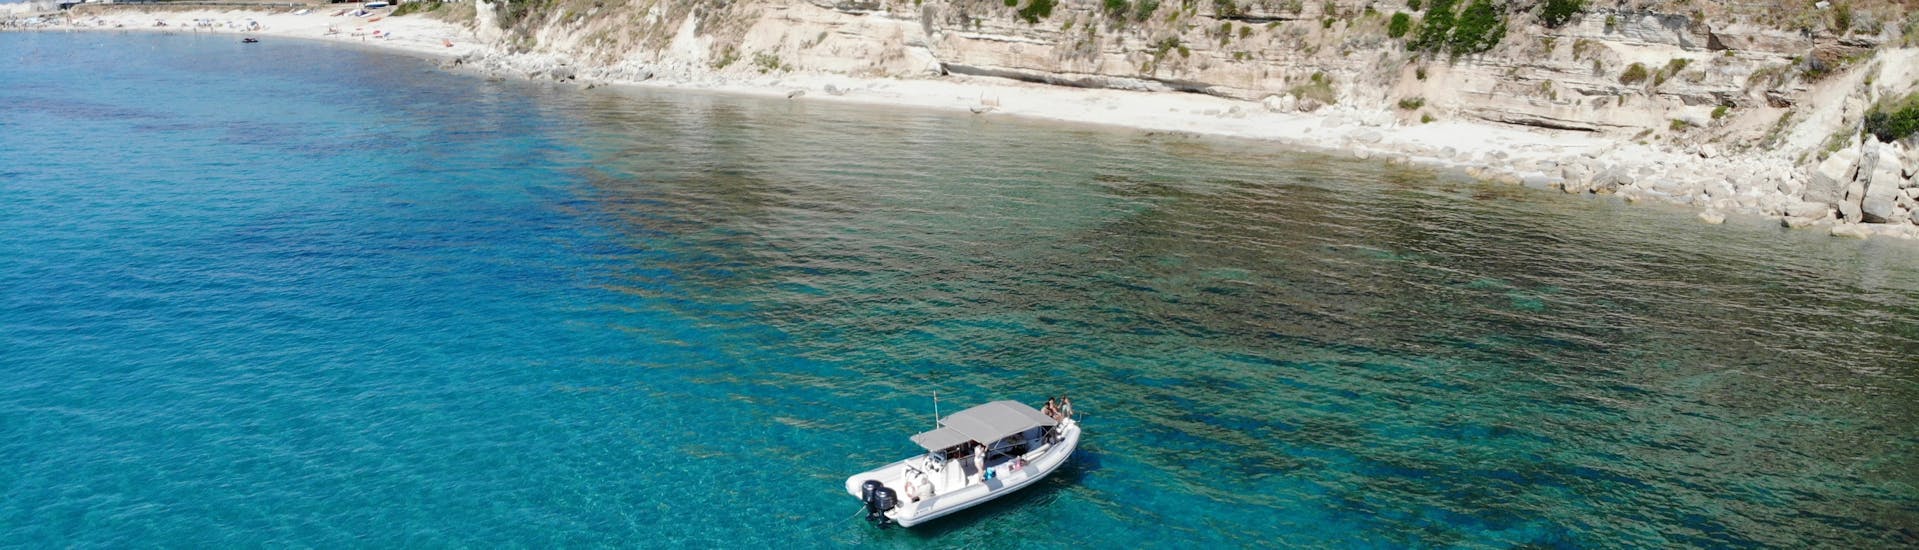 RIB Boat from TropeaSub seen from above during the private RIB boat tour from Tropea to Sant'Irene with snorkeling.